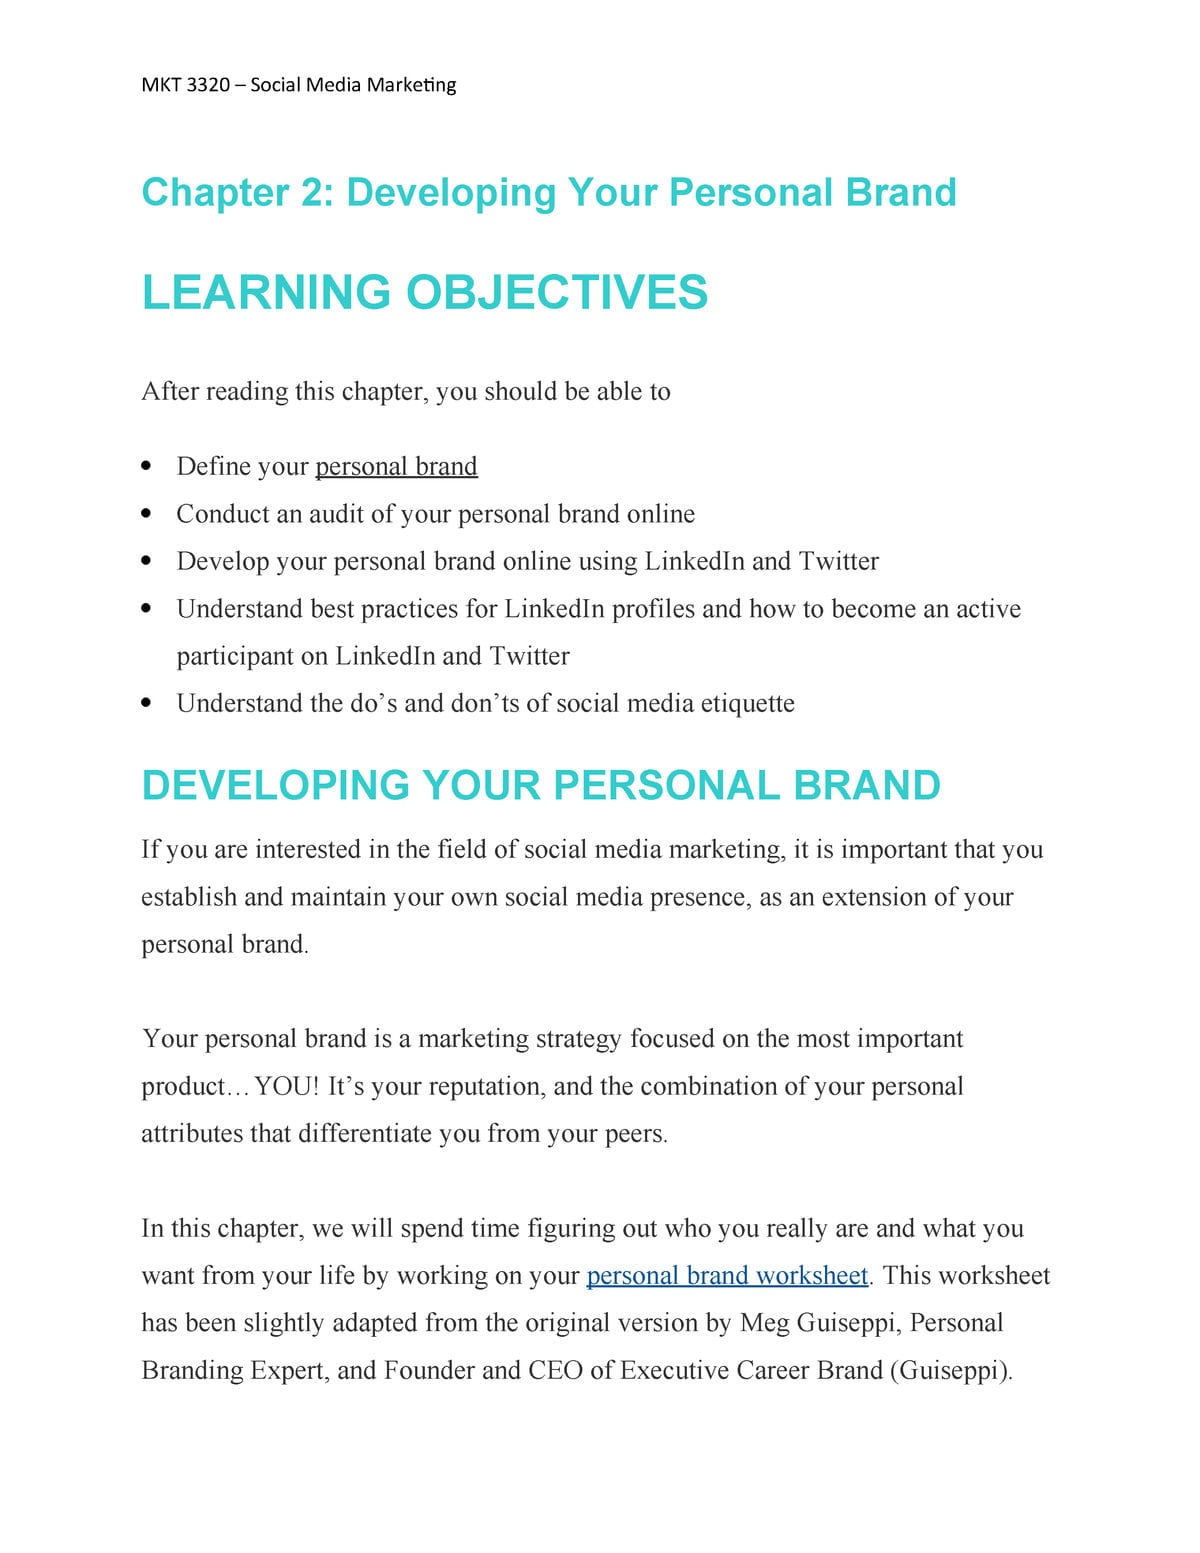 Chapter 2  Developing Your Personal Brand  Mkt 3320  Social Media For Personal Brand Worksheet